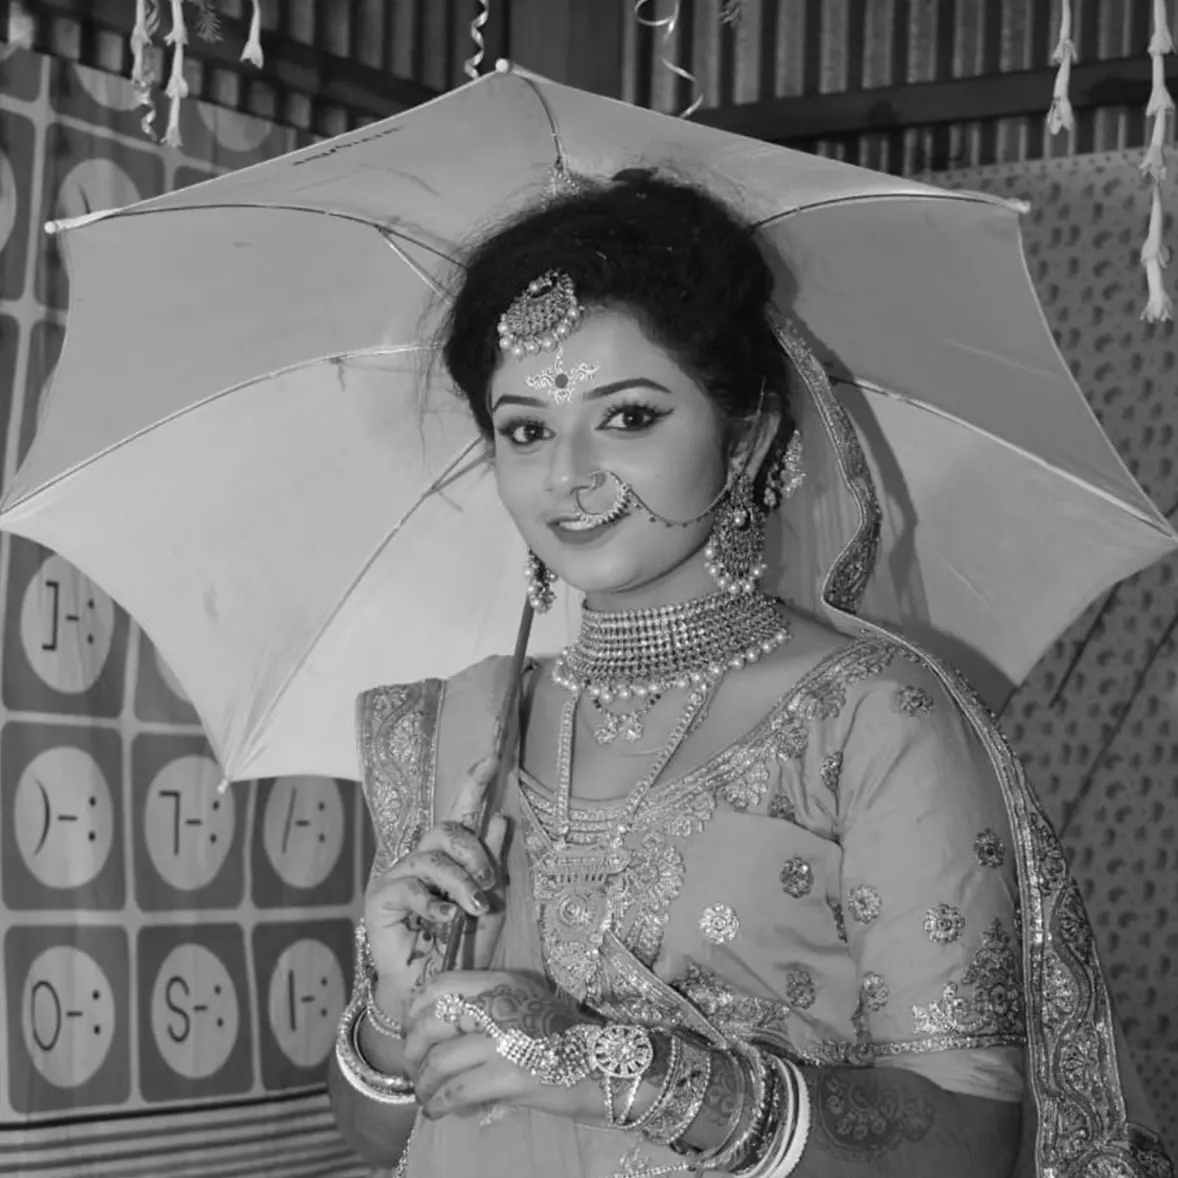 black & white image of a girl standing with umbrella